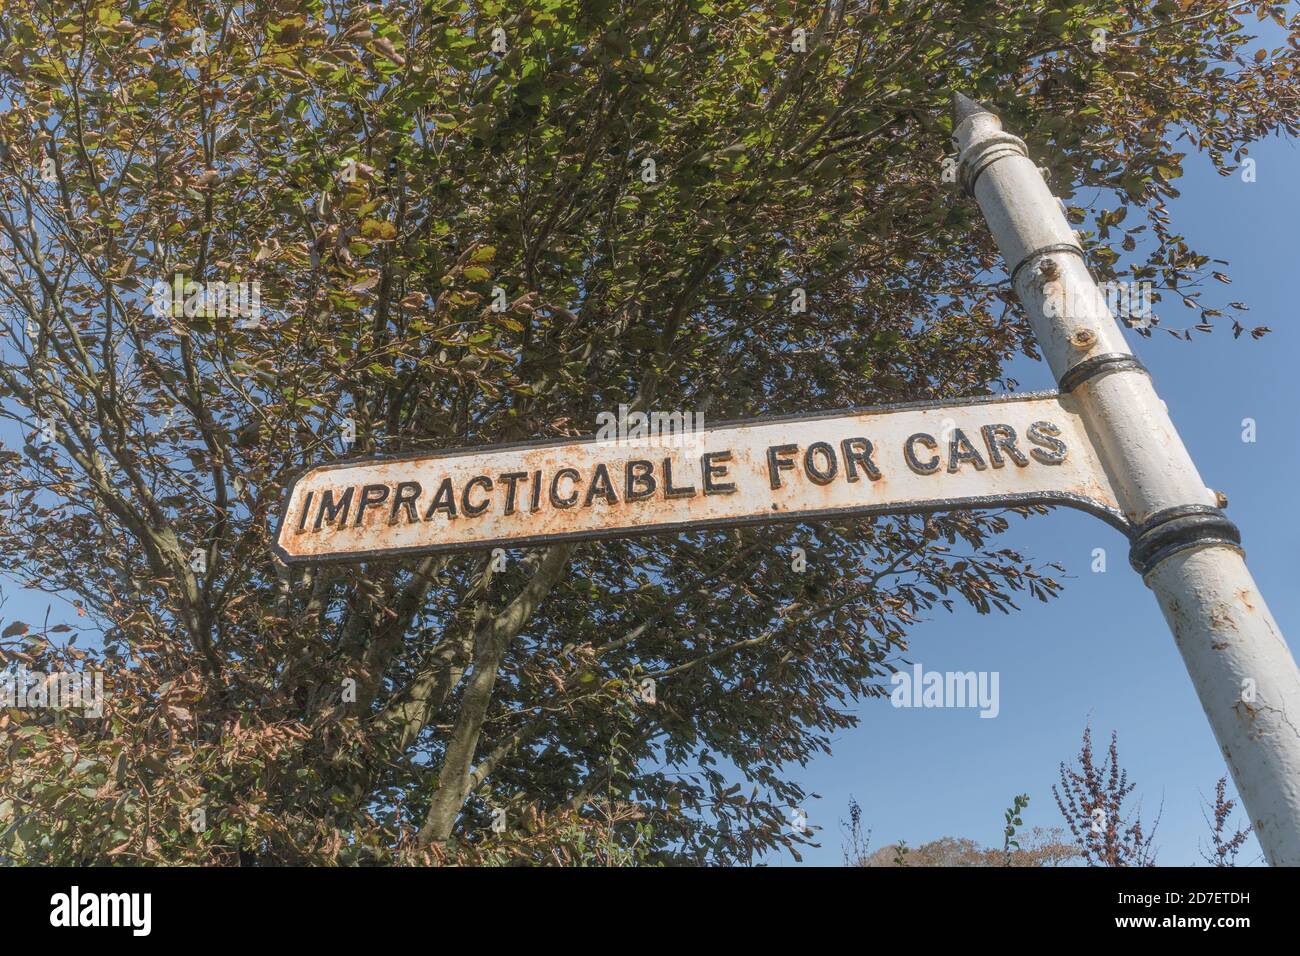 Old style rural road sign with 'Impracticable for Cars' sign near St. Winnow, Cornwall. Rural road not suitable for cars, off-roading, rough track. Stock Photo